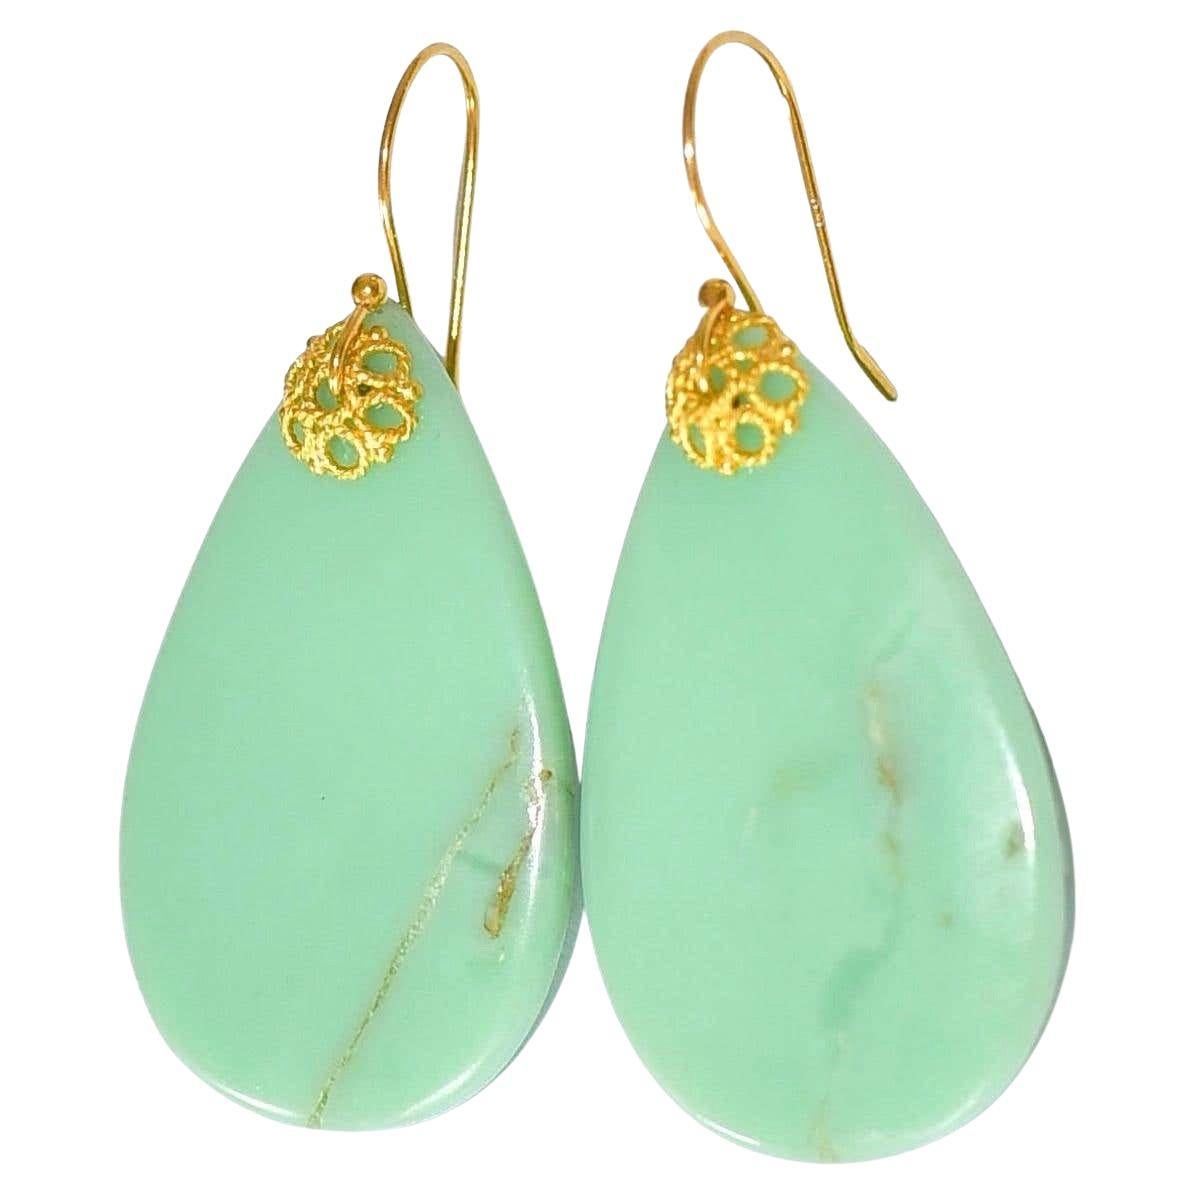 Minty Chrysoprase Earrings in 18K Solid Yellow Gold For Sale